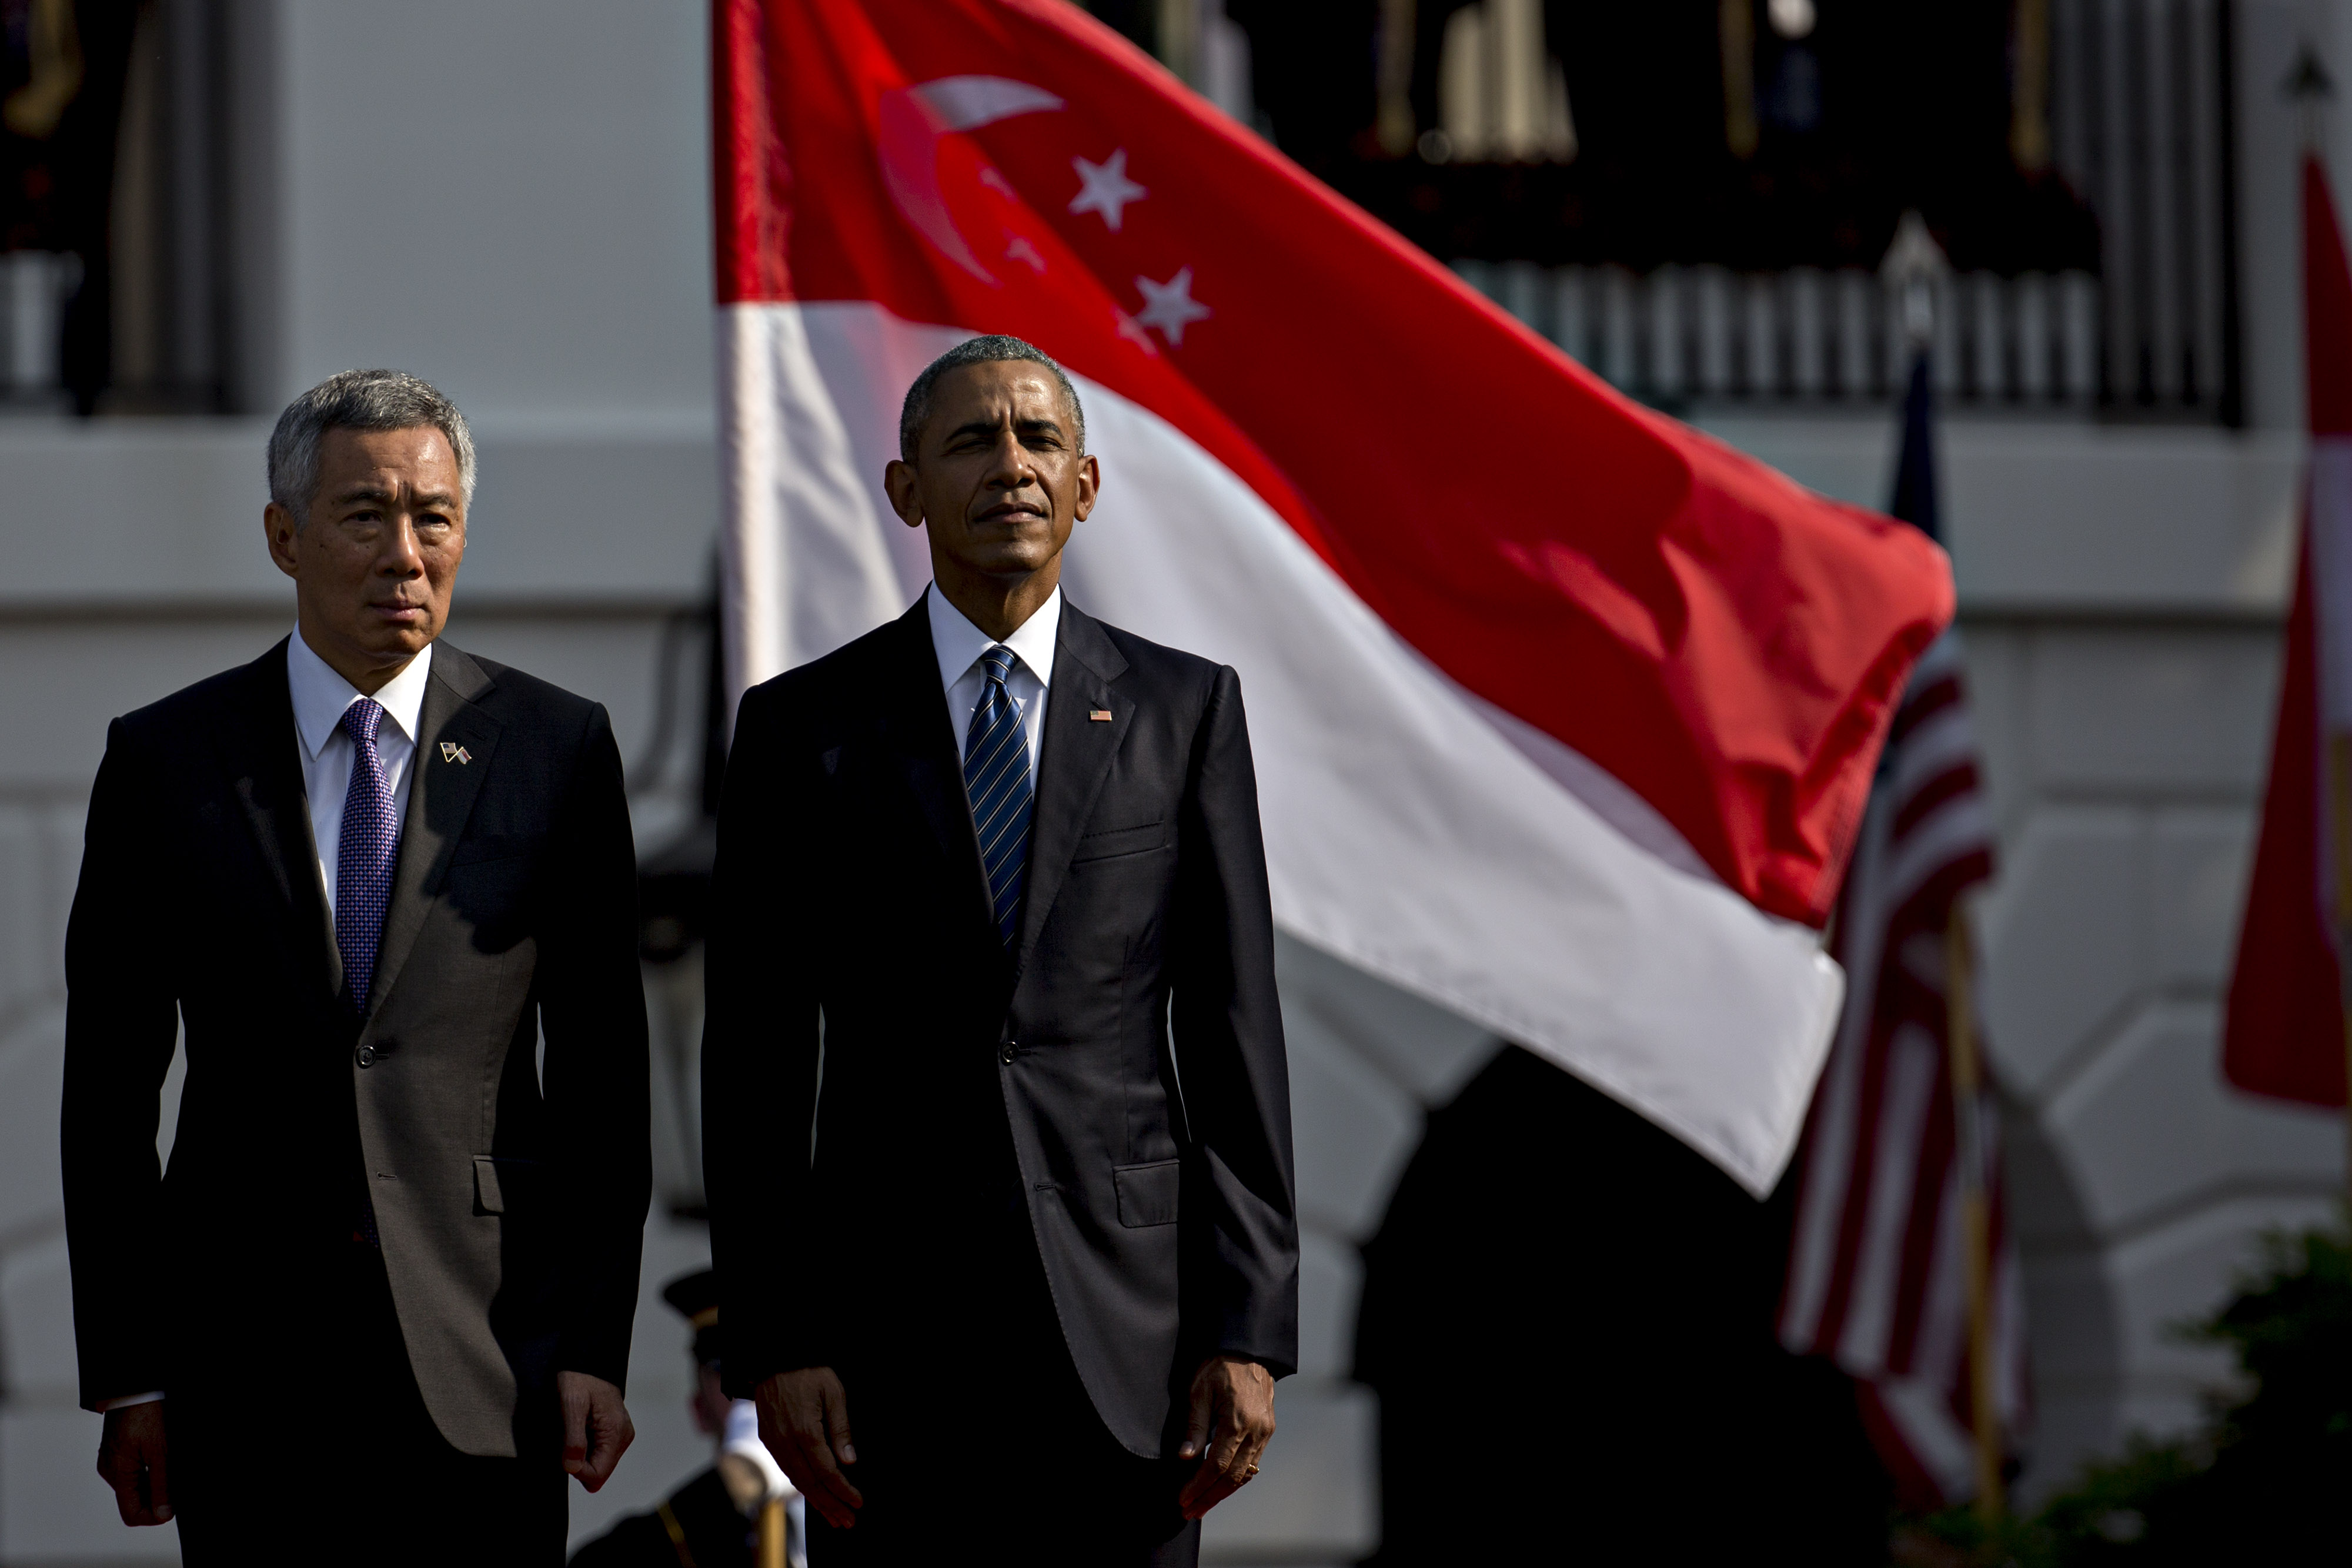 U.S. President Barack Obama, right, and Lee Hsien Loong, Singapore's prime minster, participate in an official arrival ceremony on the South Lawn of the White House in Washington, D.C., U.S., on Tuesday, Aug. 2, 2016. The occasion marks first official visit by a Singapore prime minister since 1985. Photographer: Andrew Harrer/Bloomberg via Getty Images